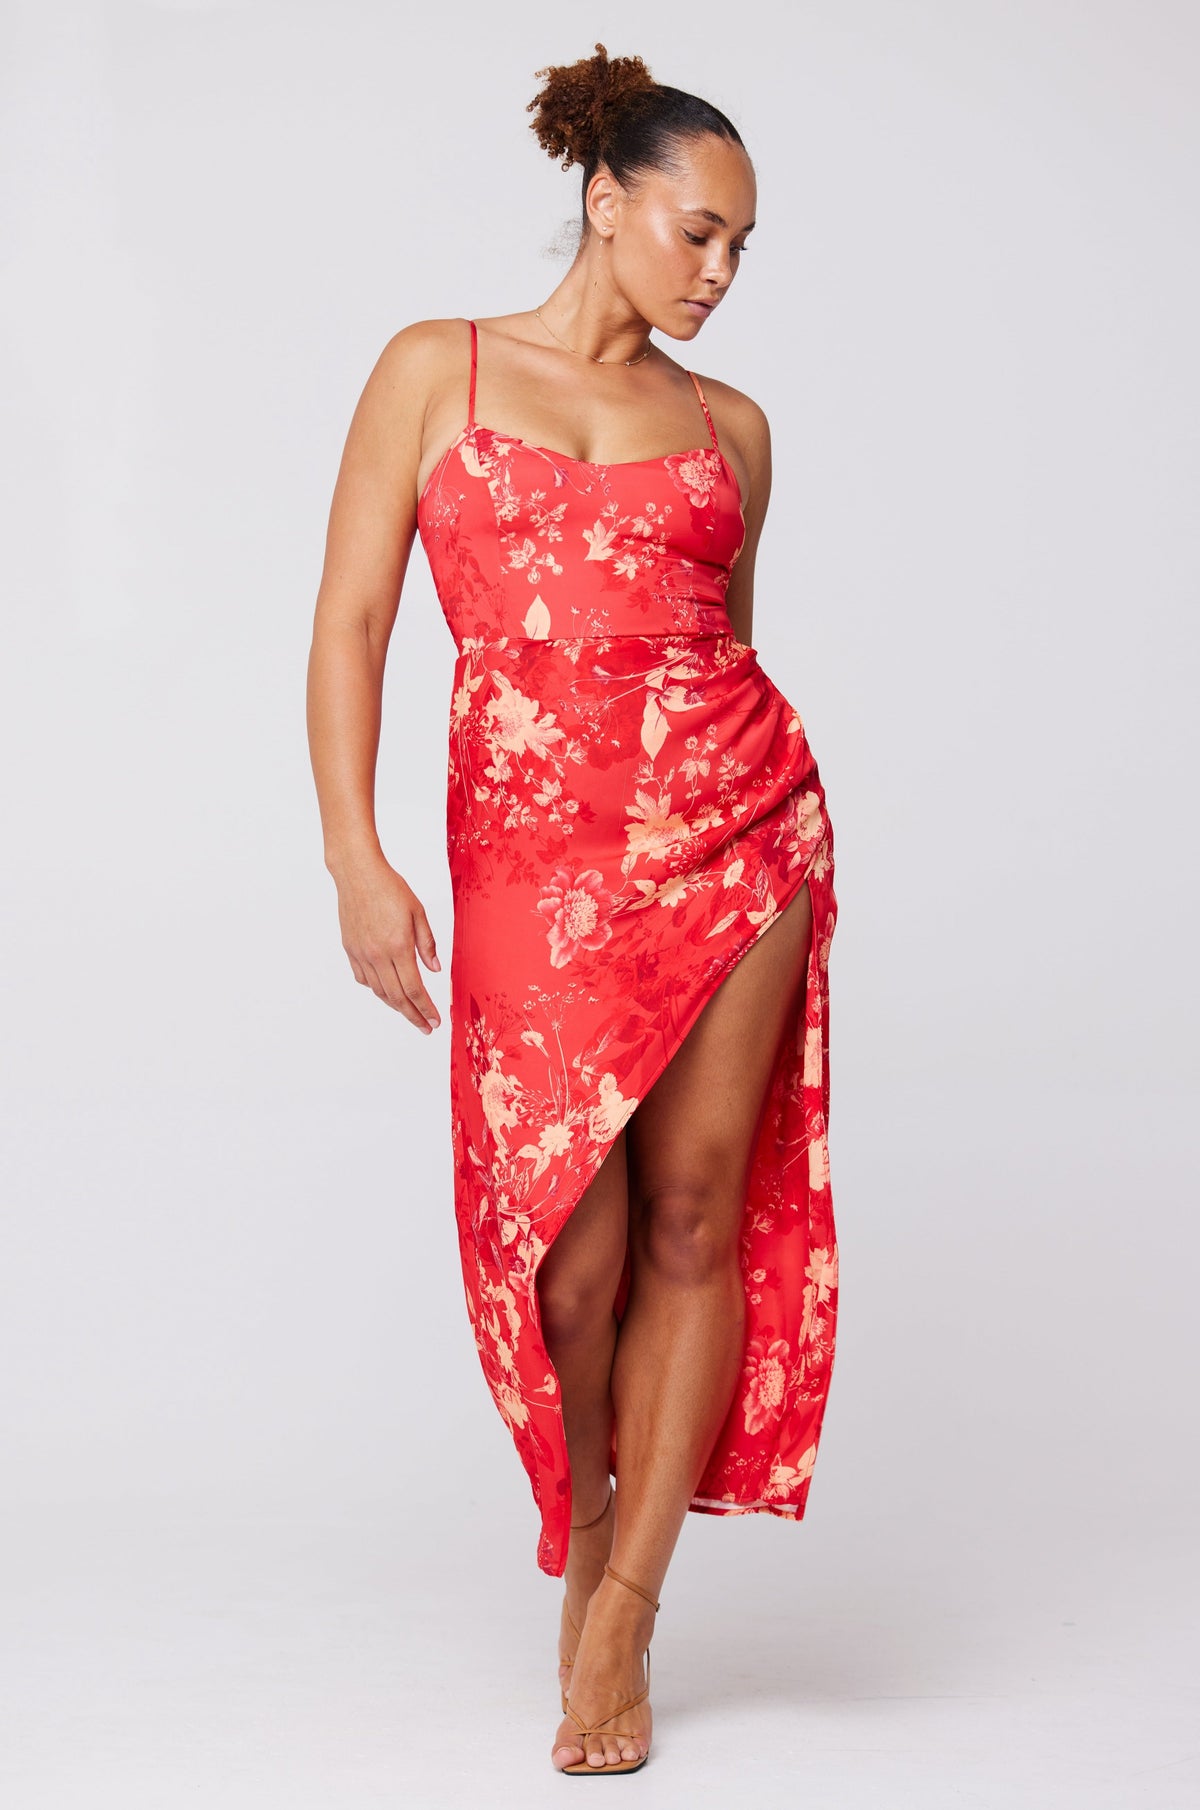 This is an image of Jessica Dress in Blossom - RESA featuring a model wearing the dress